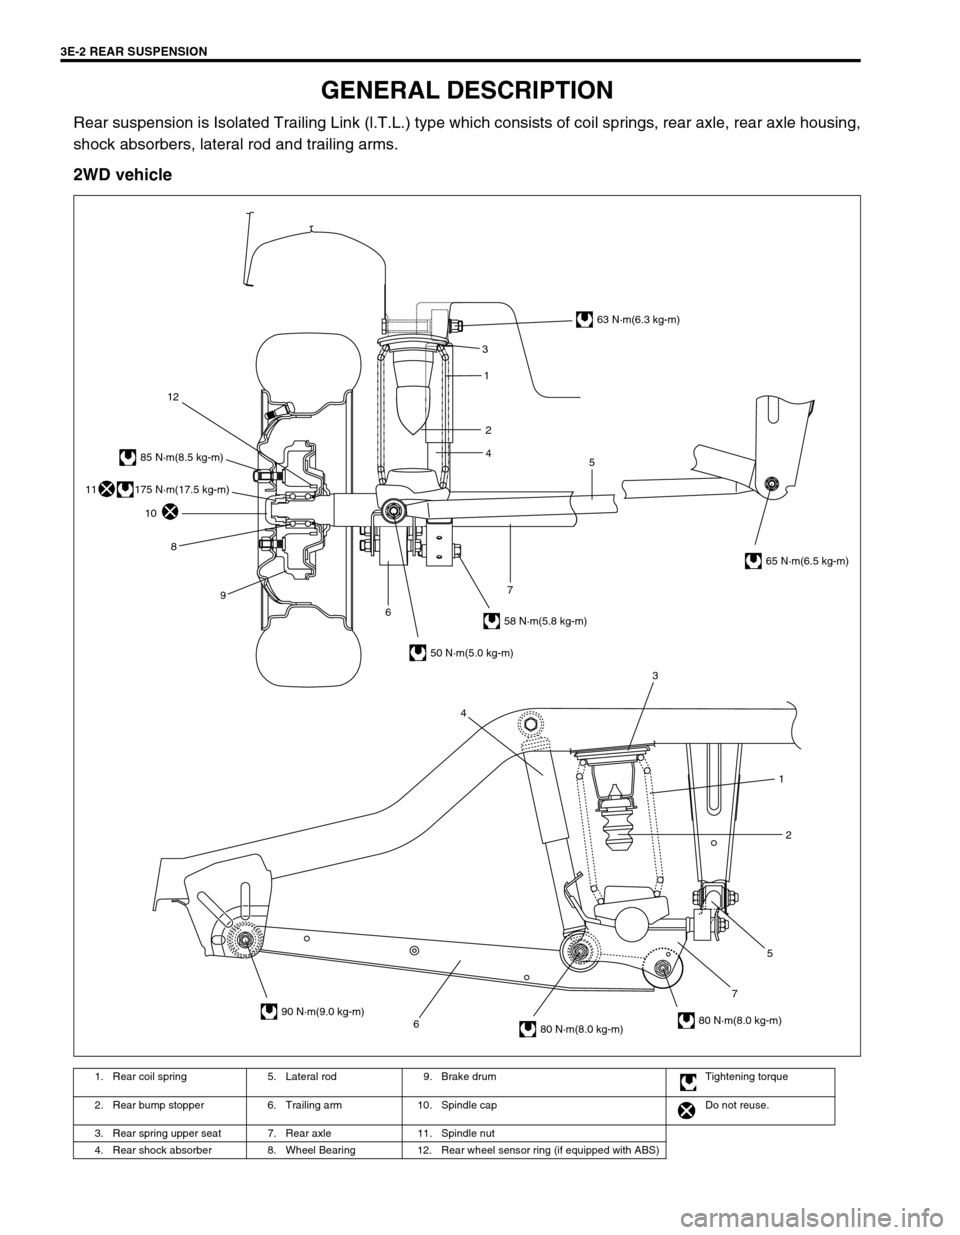 SUZUKI SWIFT 2000 1.G RG413 Service Workshop Manual 3E-2 REAR SUSPENSION
GENERAL DESCRIPTION
Rear suspension is Isolated Trailing Link (l.T.L.) type which consists of coil springs, rear axle, rear axle housing,
shock absorbers, lateral rod and trailing